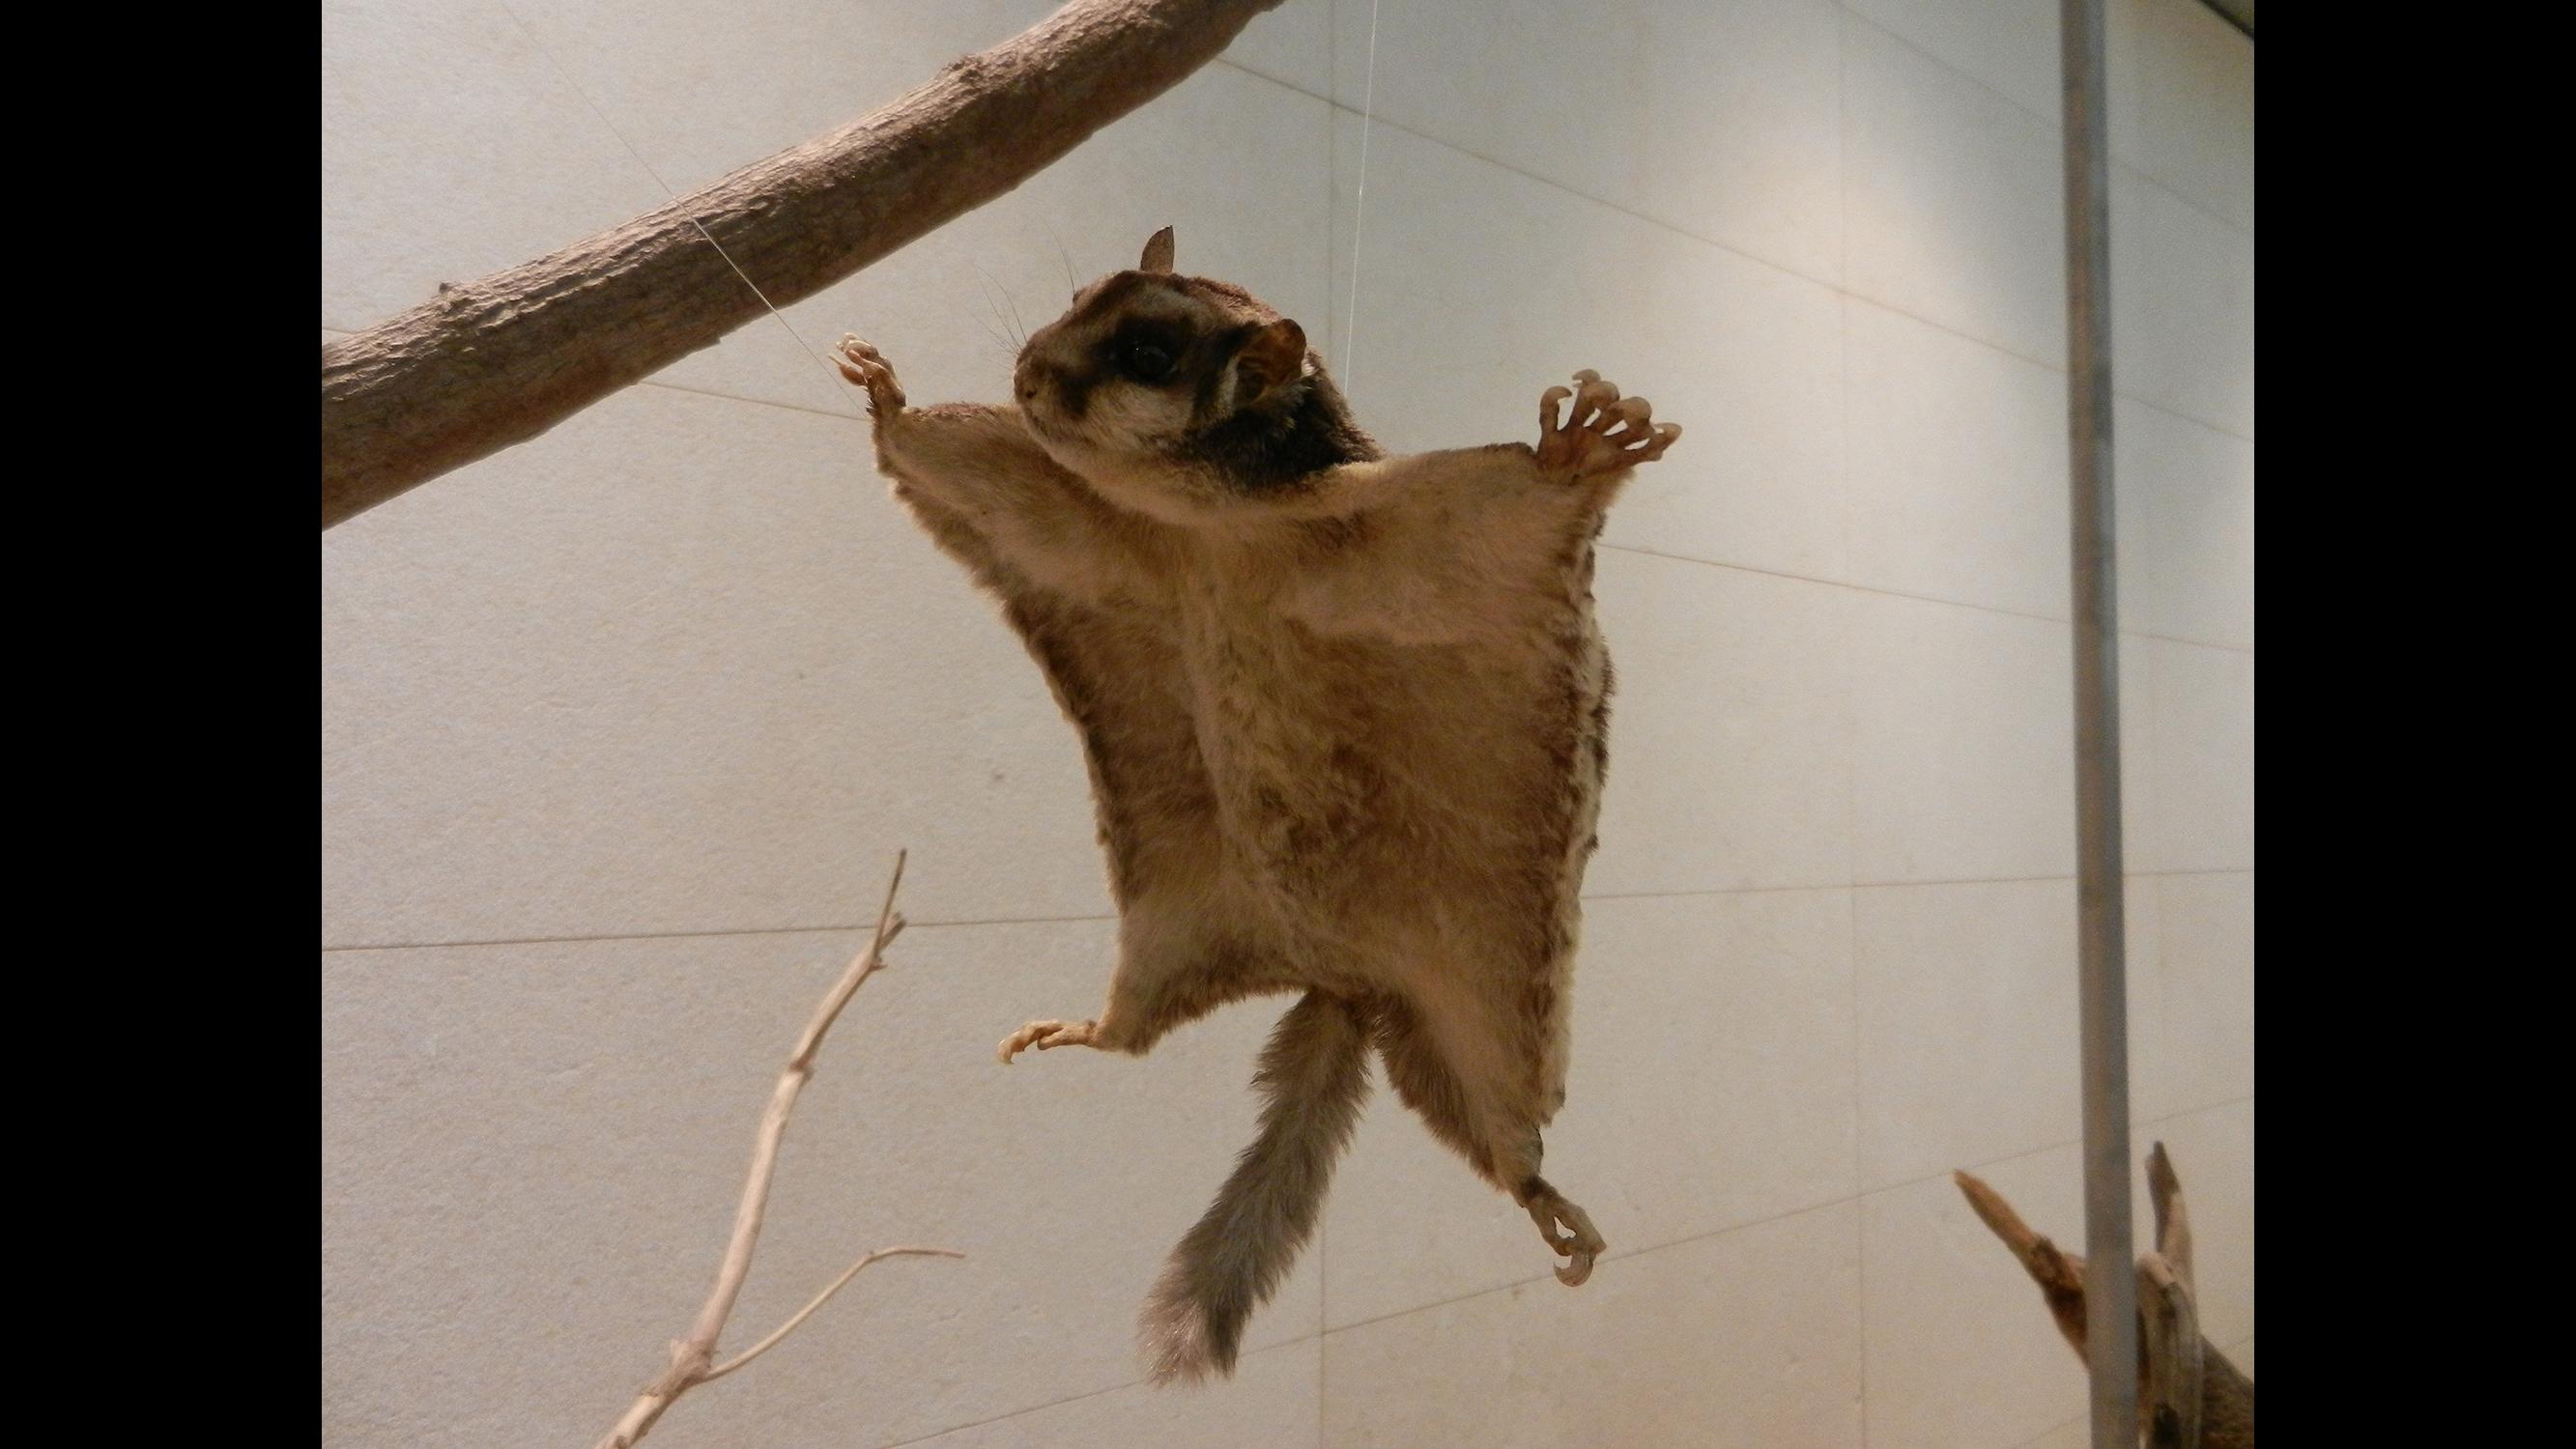 A preserved flying squirrel on display at the Museo delle Scienze in Trento, Italy. (Dega180 / Wikimedia Commons) 